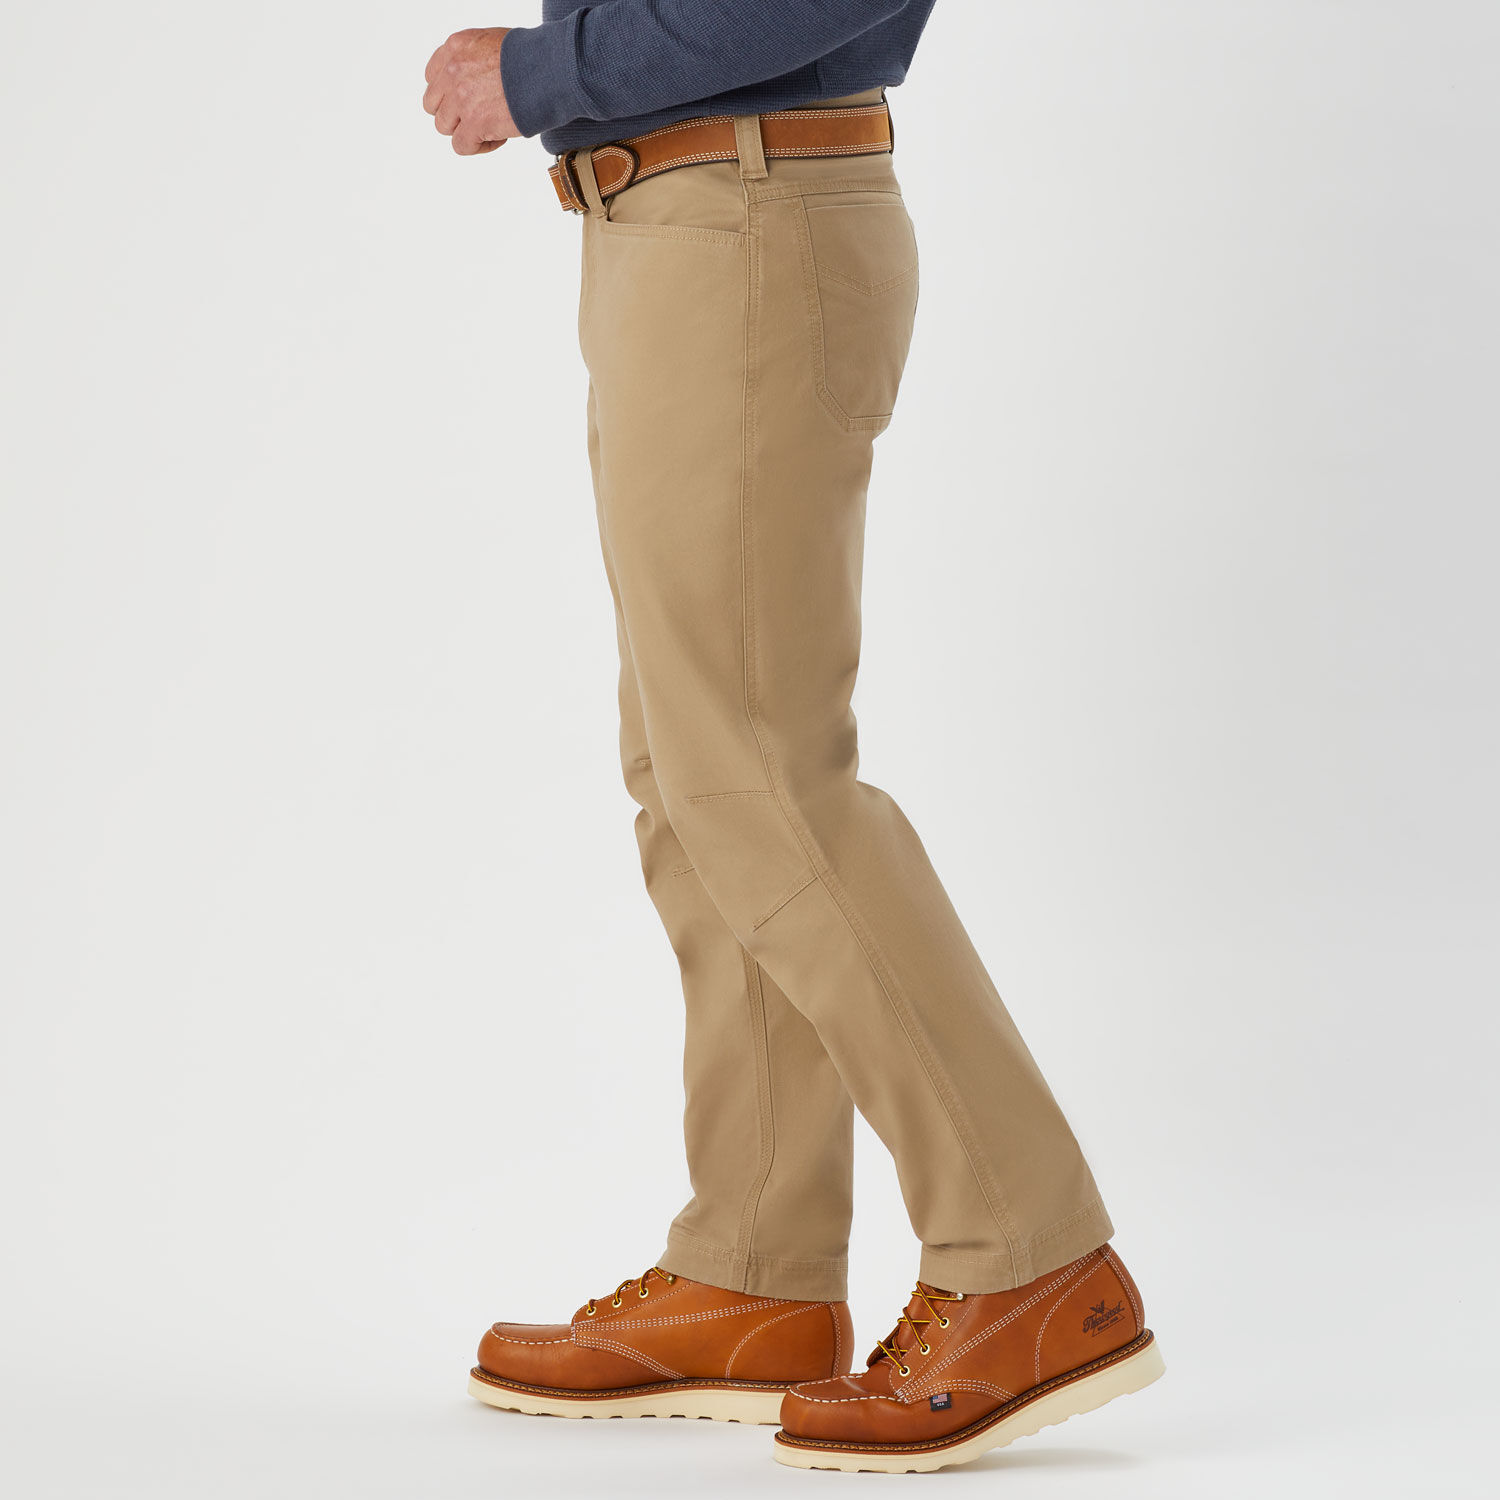 Outfit Guide on What Shoes To Style With Khaki Pants - The Jacket Maker Blog